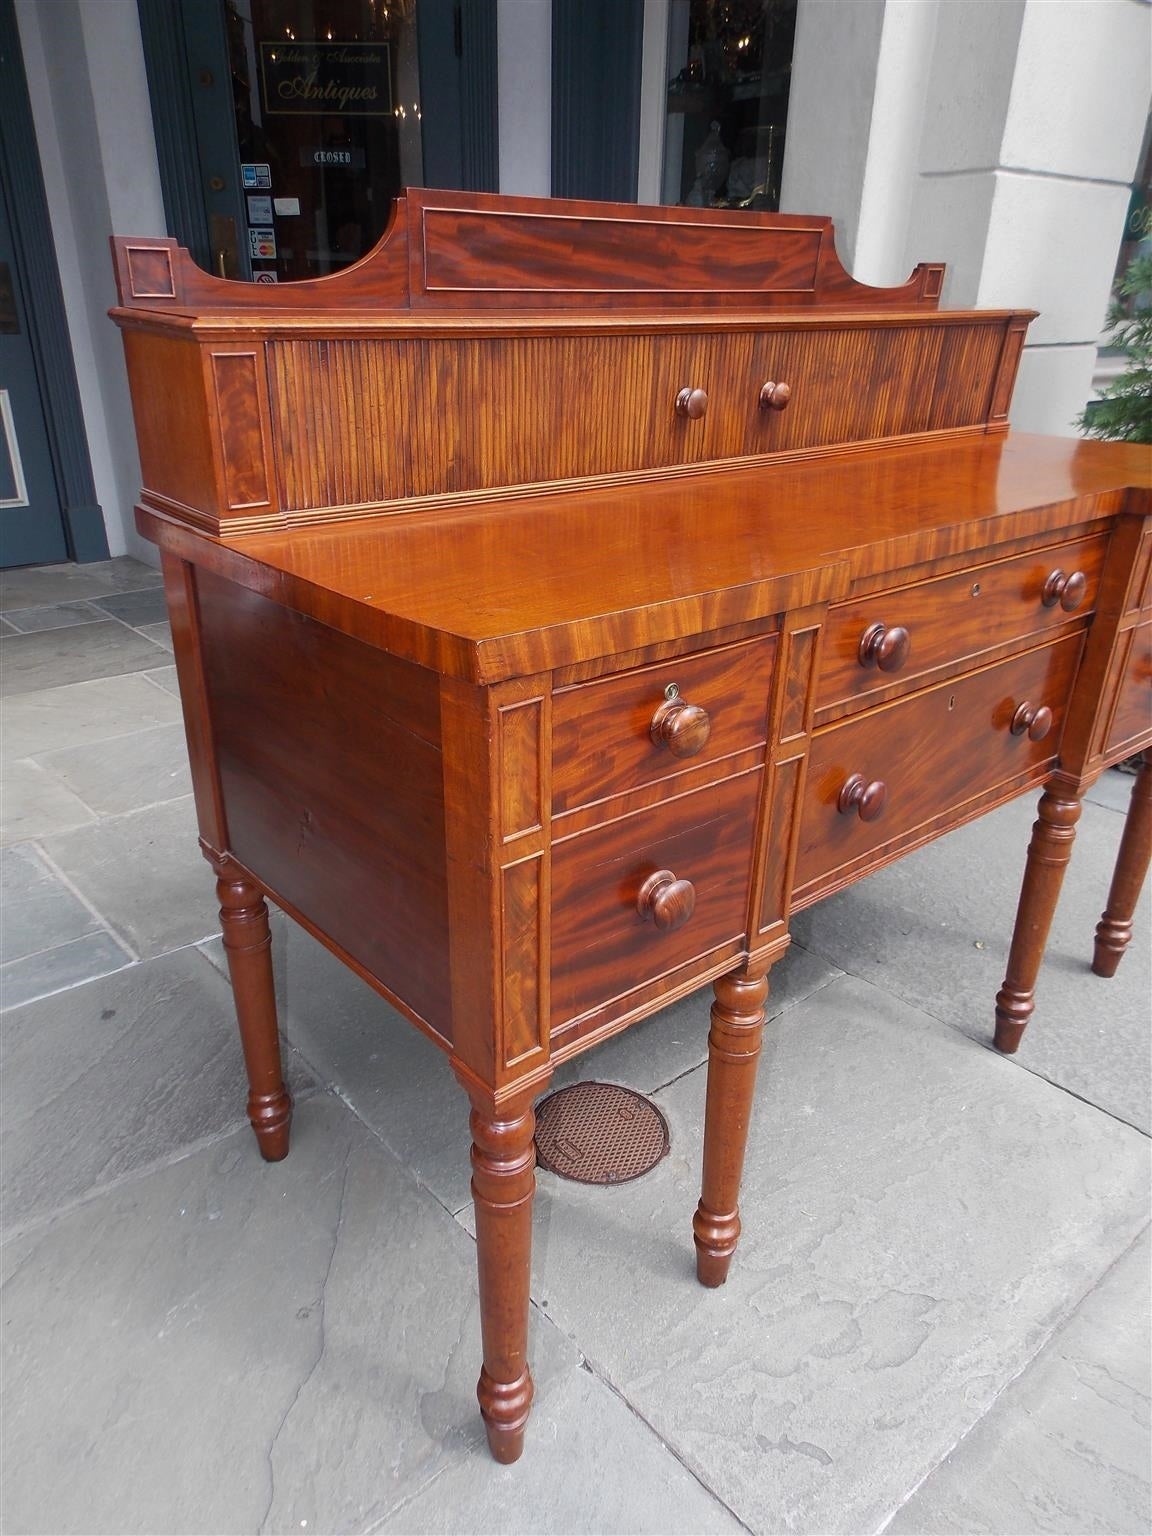 Early 19th Century English Regency Mahogany Tambour Top Sideboard, Circa 1810 For Sale